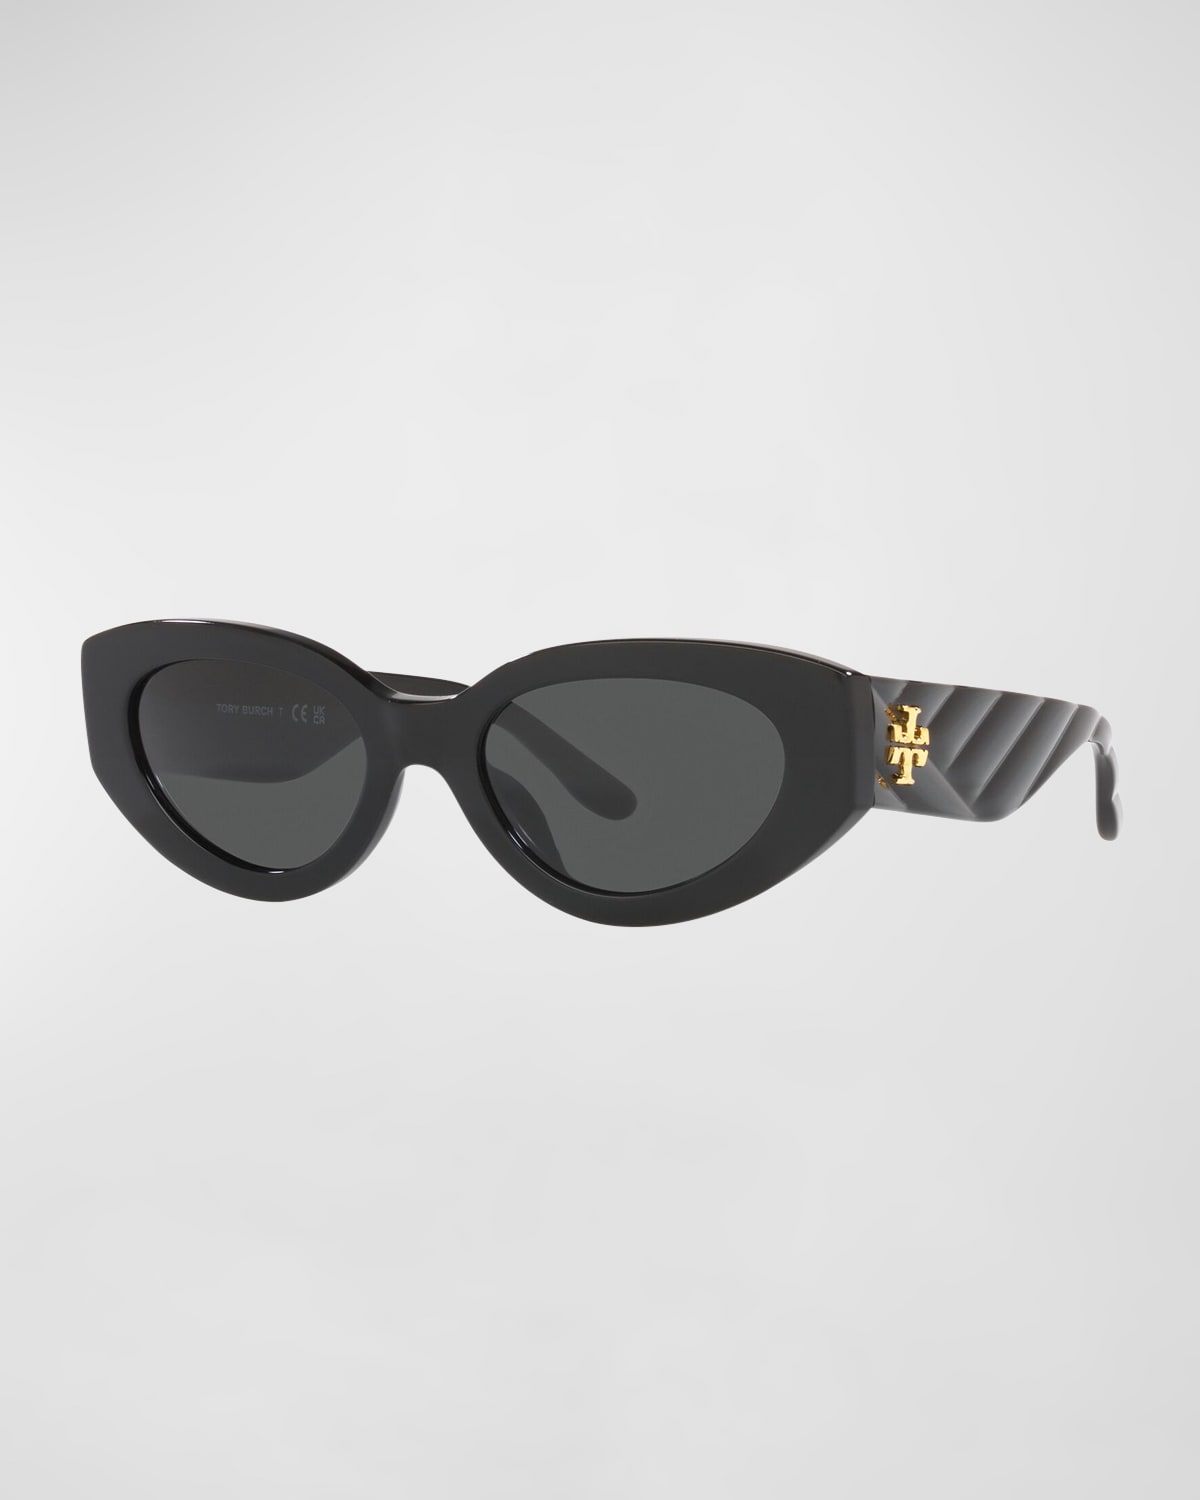 Tory Burch Textured Acetate Cat-eye Sunglasses In Black/gray Solid